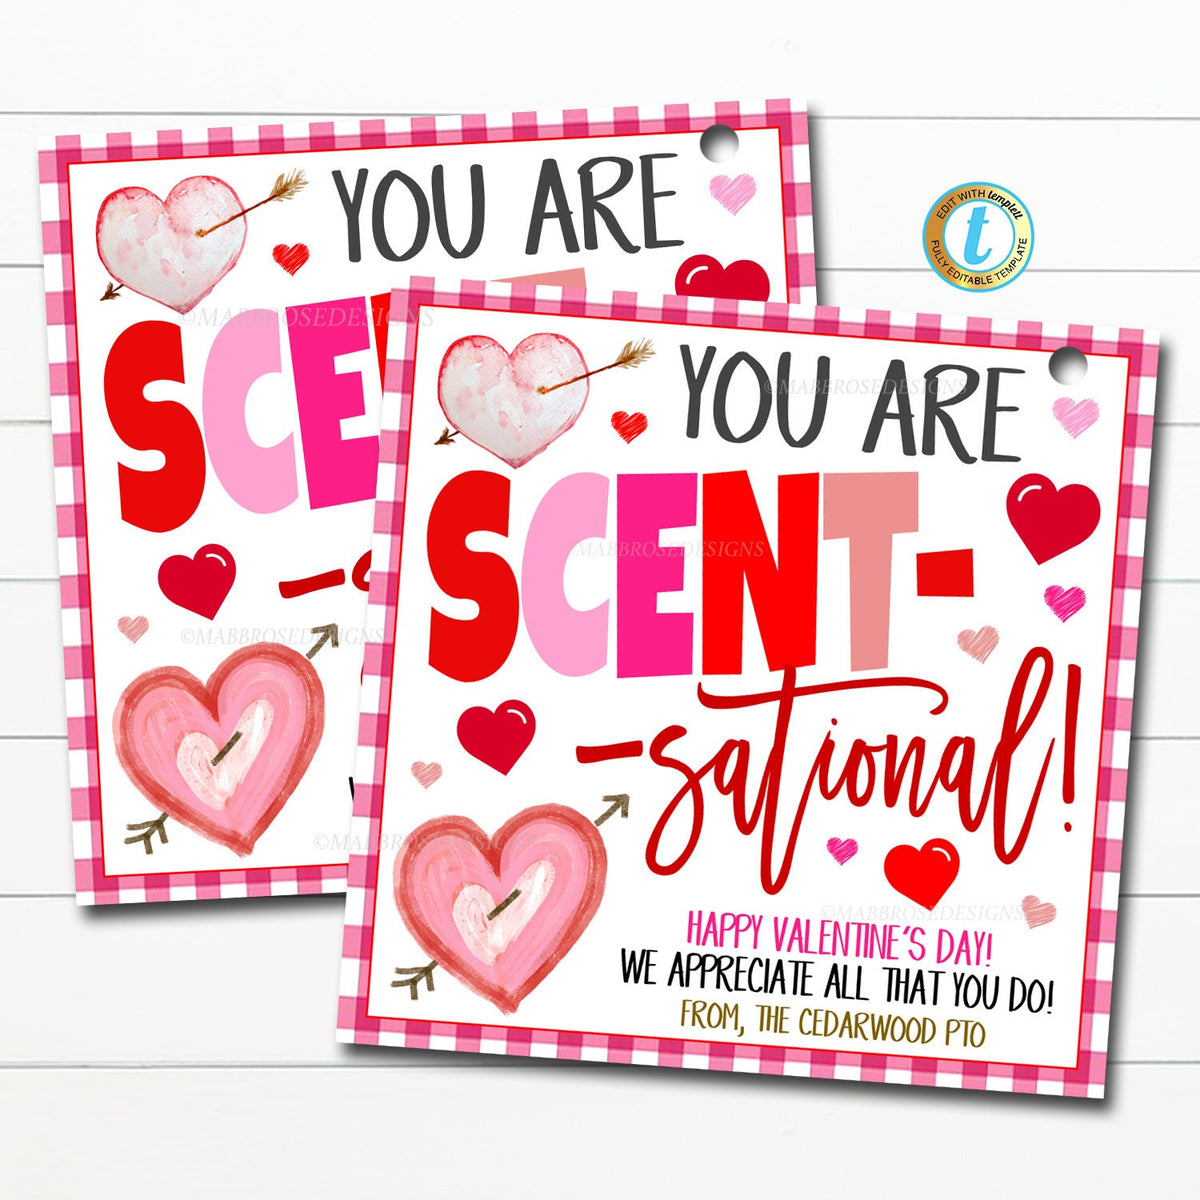 You are scent sational Valentine #39 s Day Gift Tag TidyLady Printables